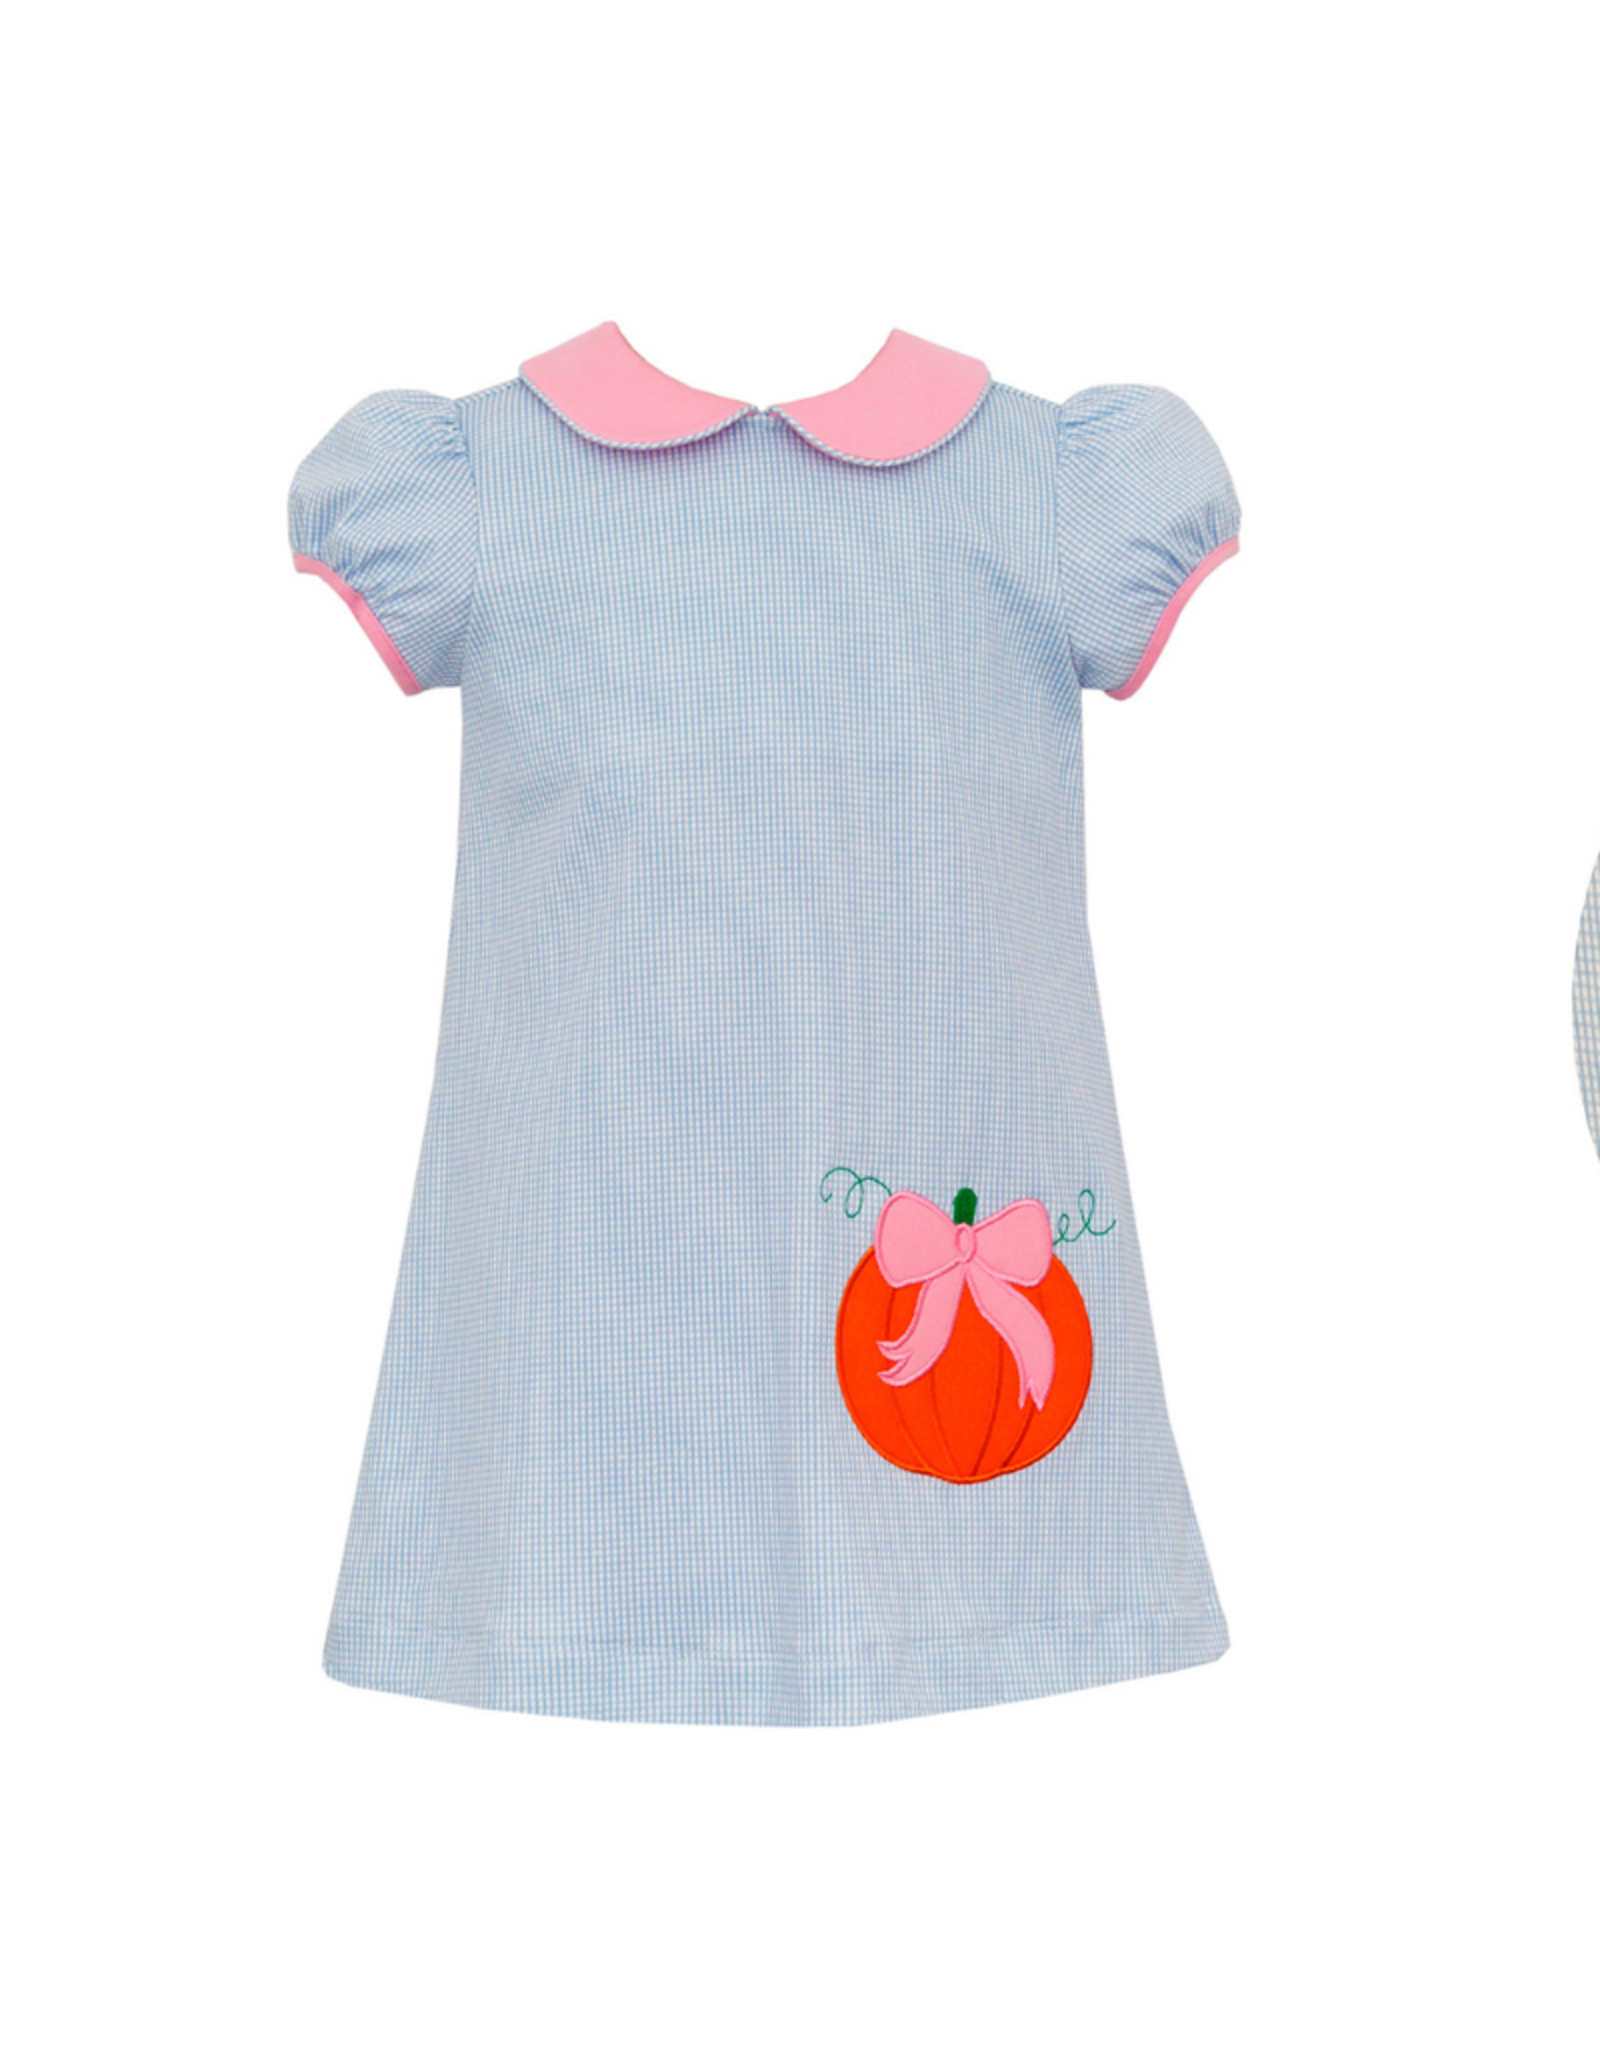 Claire and Charlie Blue Gingham Knit Pumpkin Dress